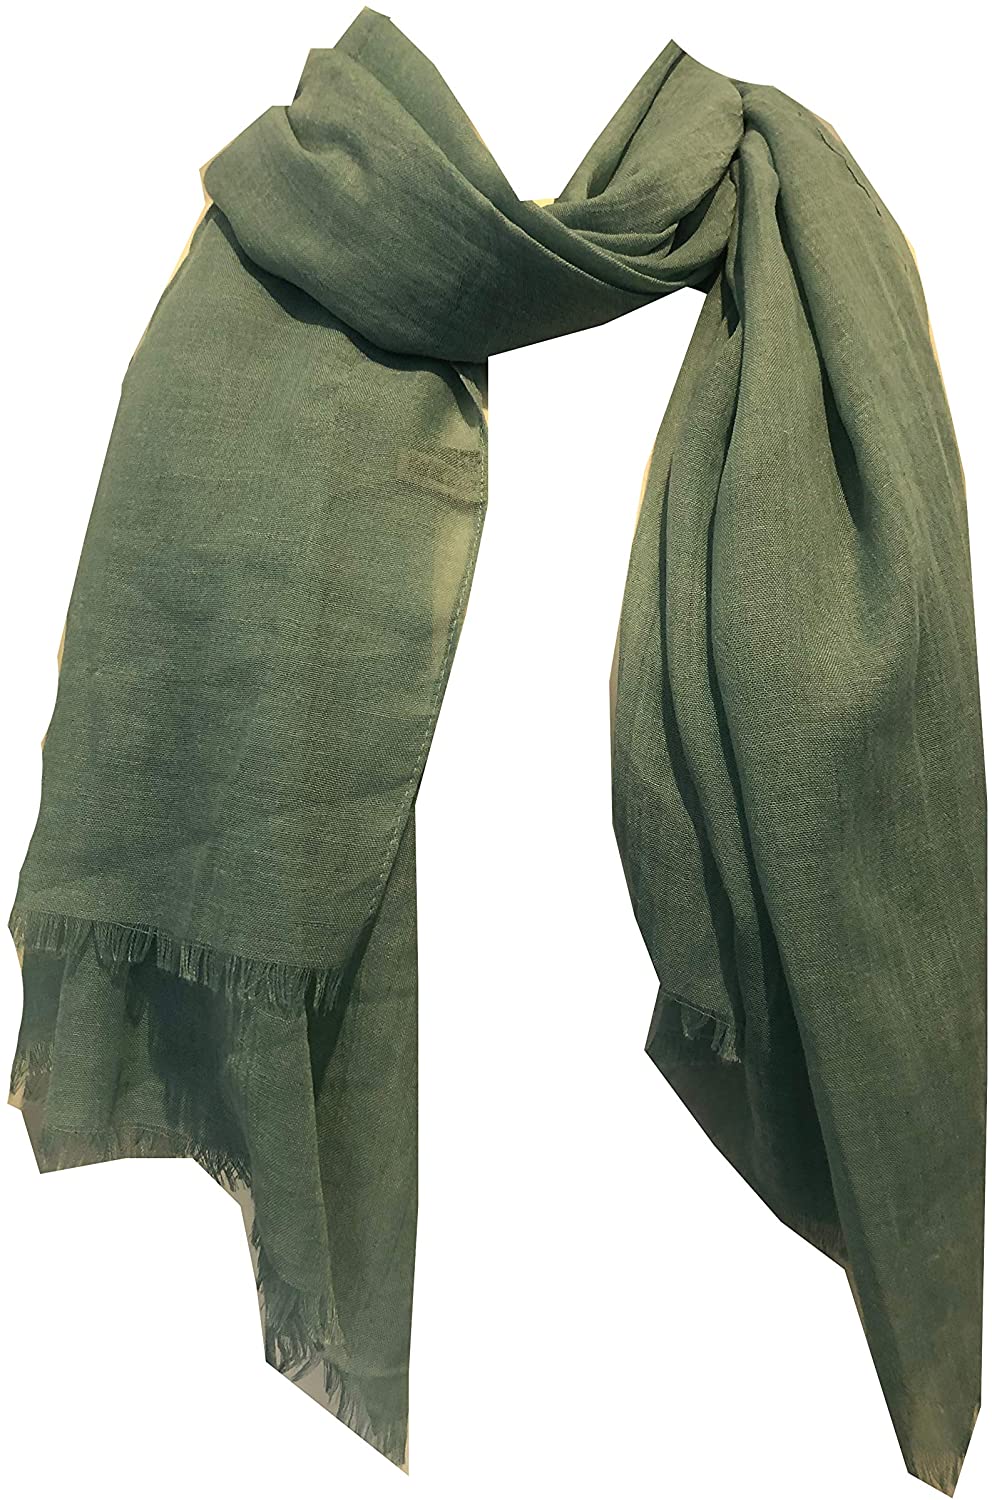 Pamper Yourself Now Aqua Green Plain Soft Long Scarf/wrap with Frayed Edge